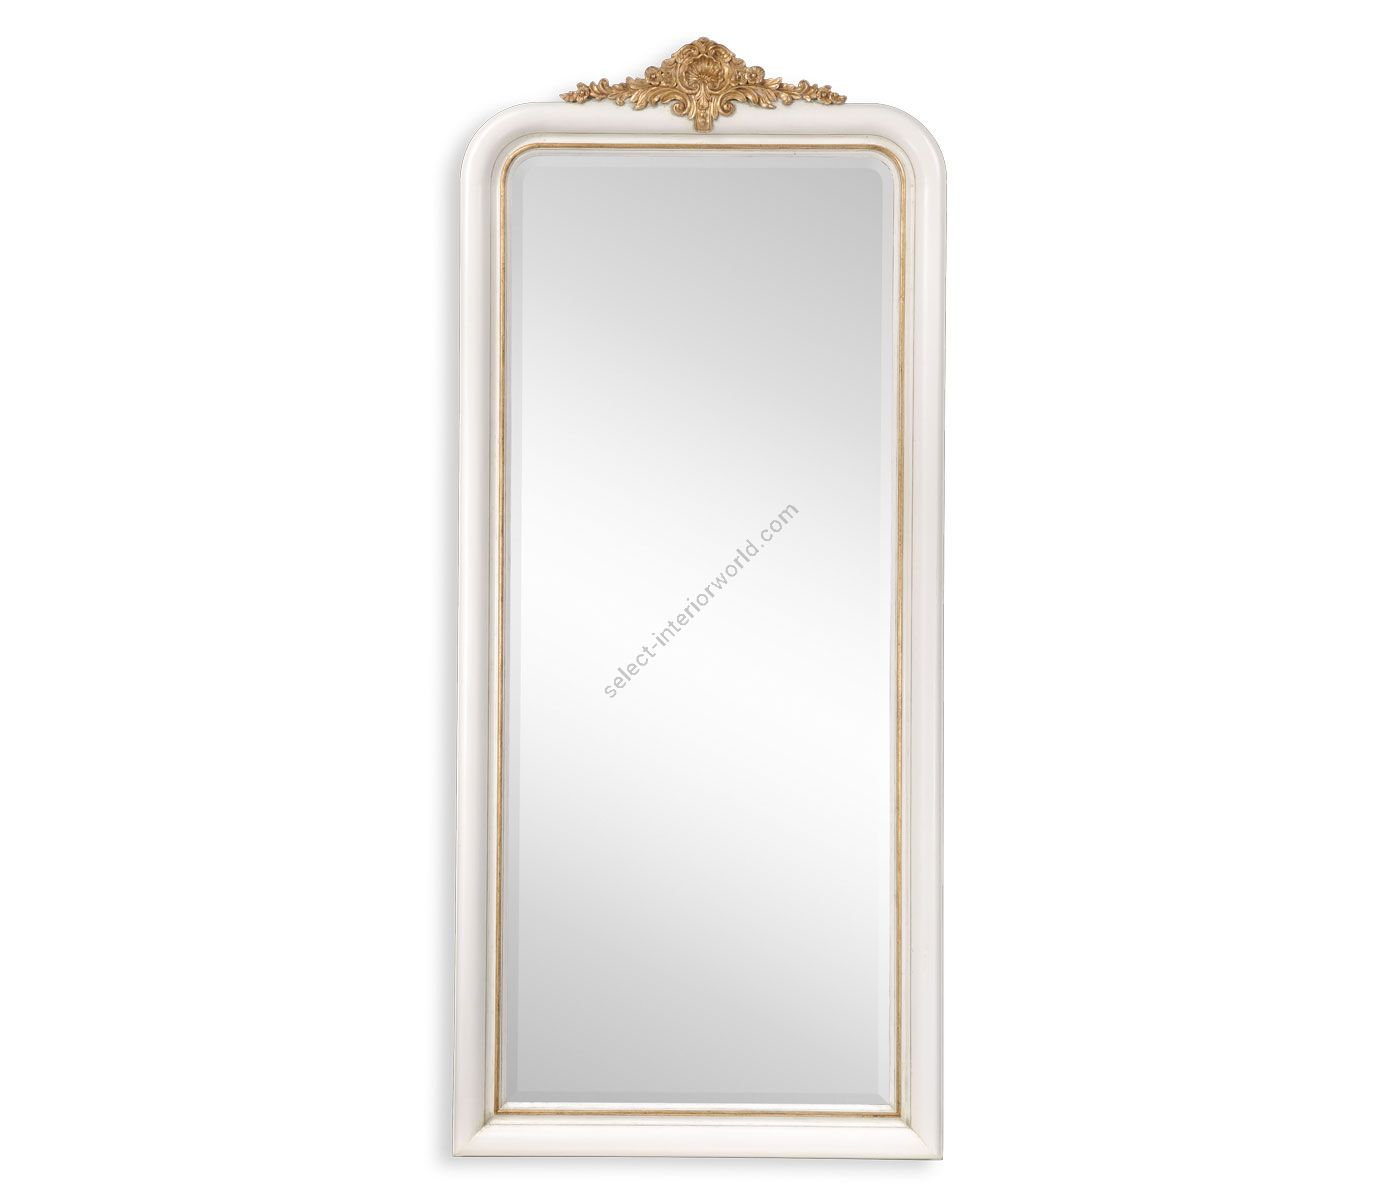 Jonathan Charles / Impressive Hanging Or Floor Standing French Style Mirror